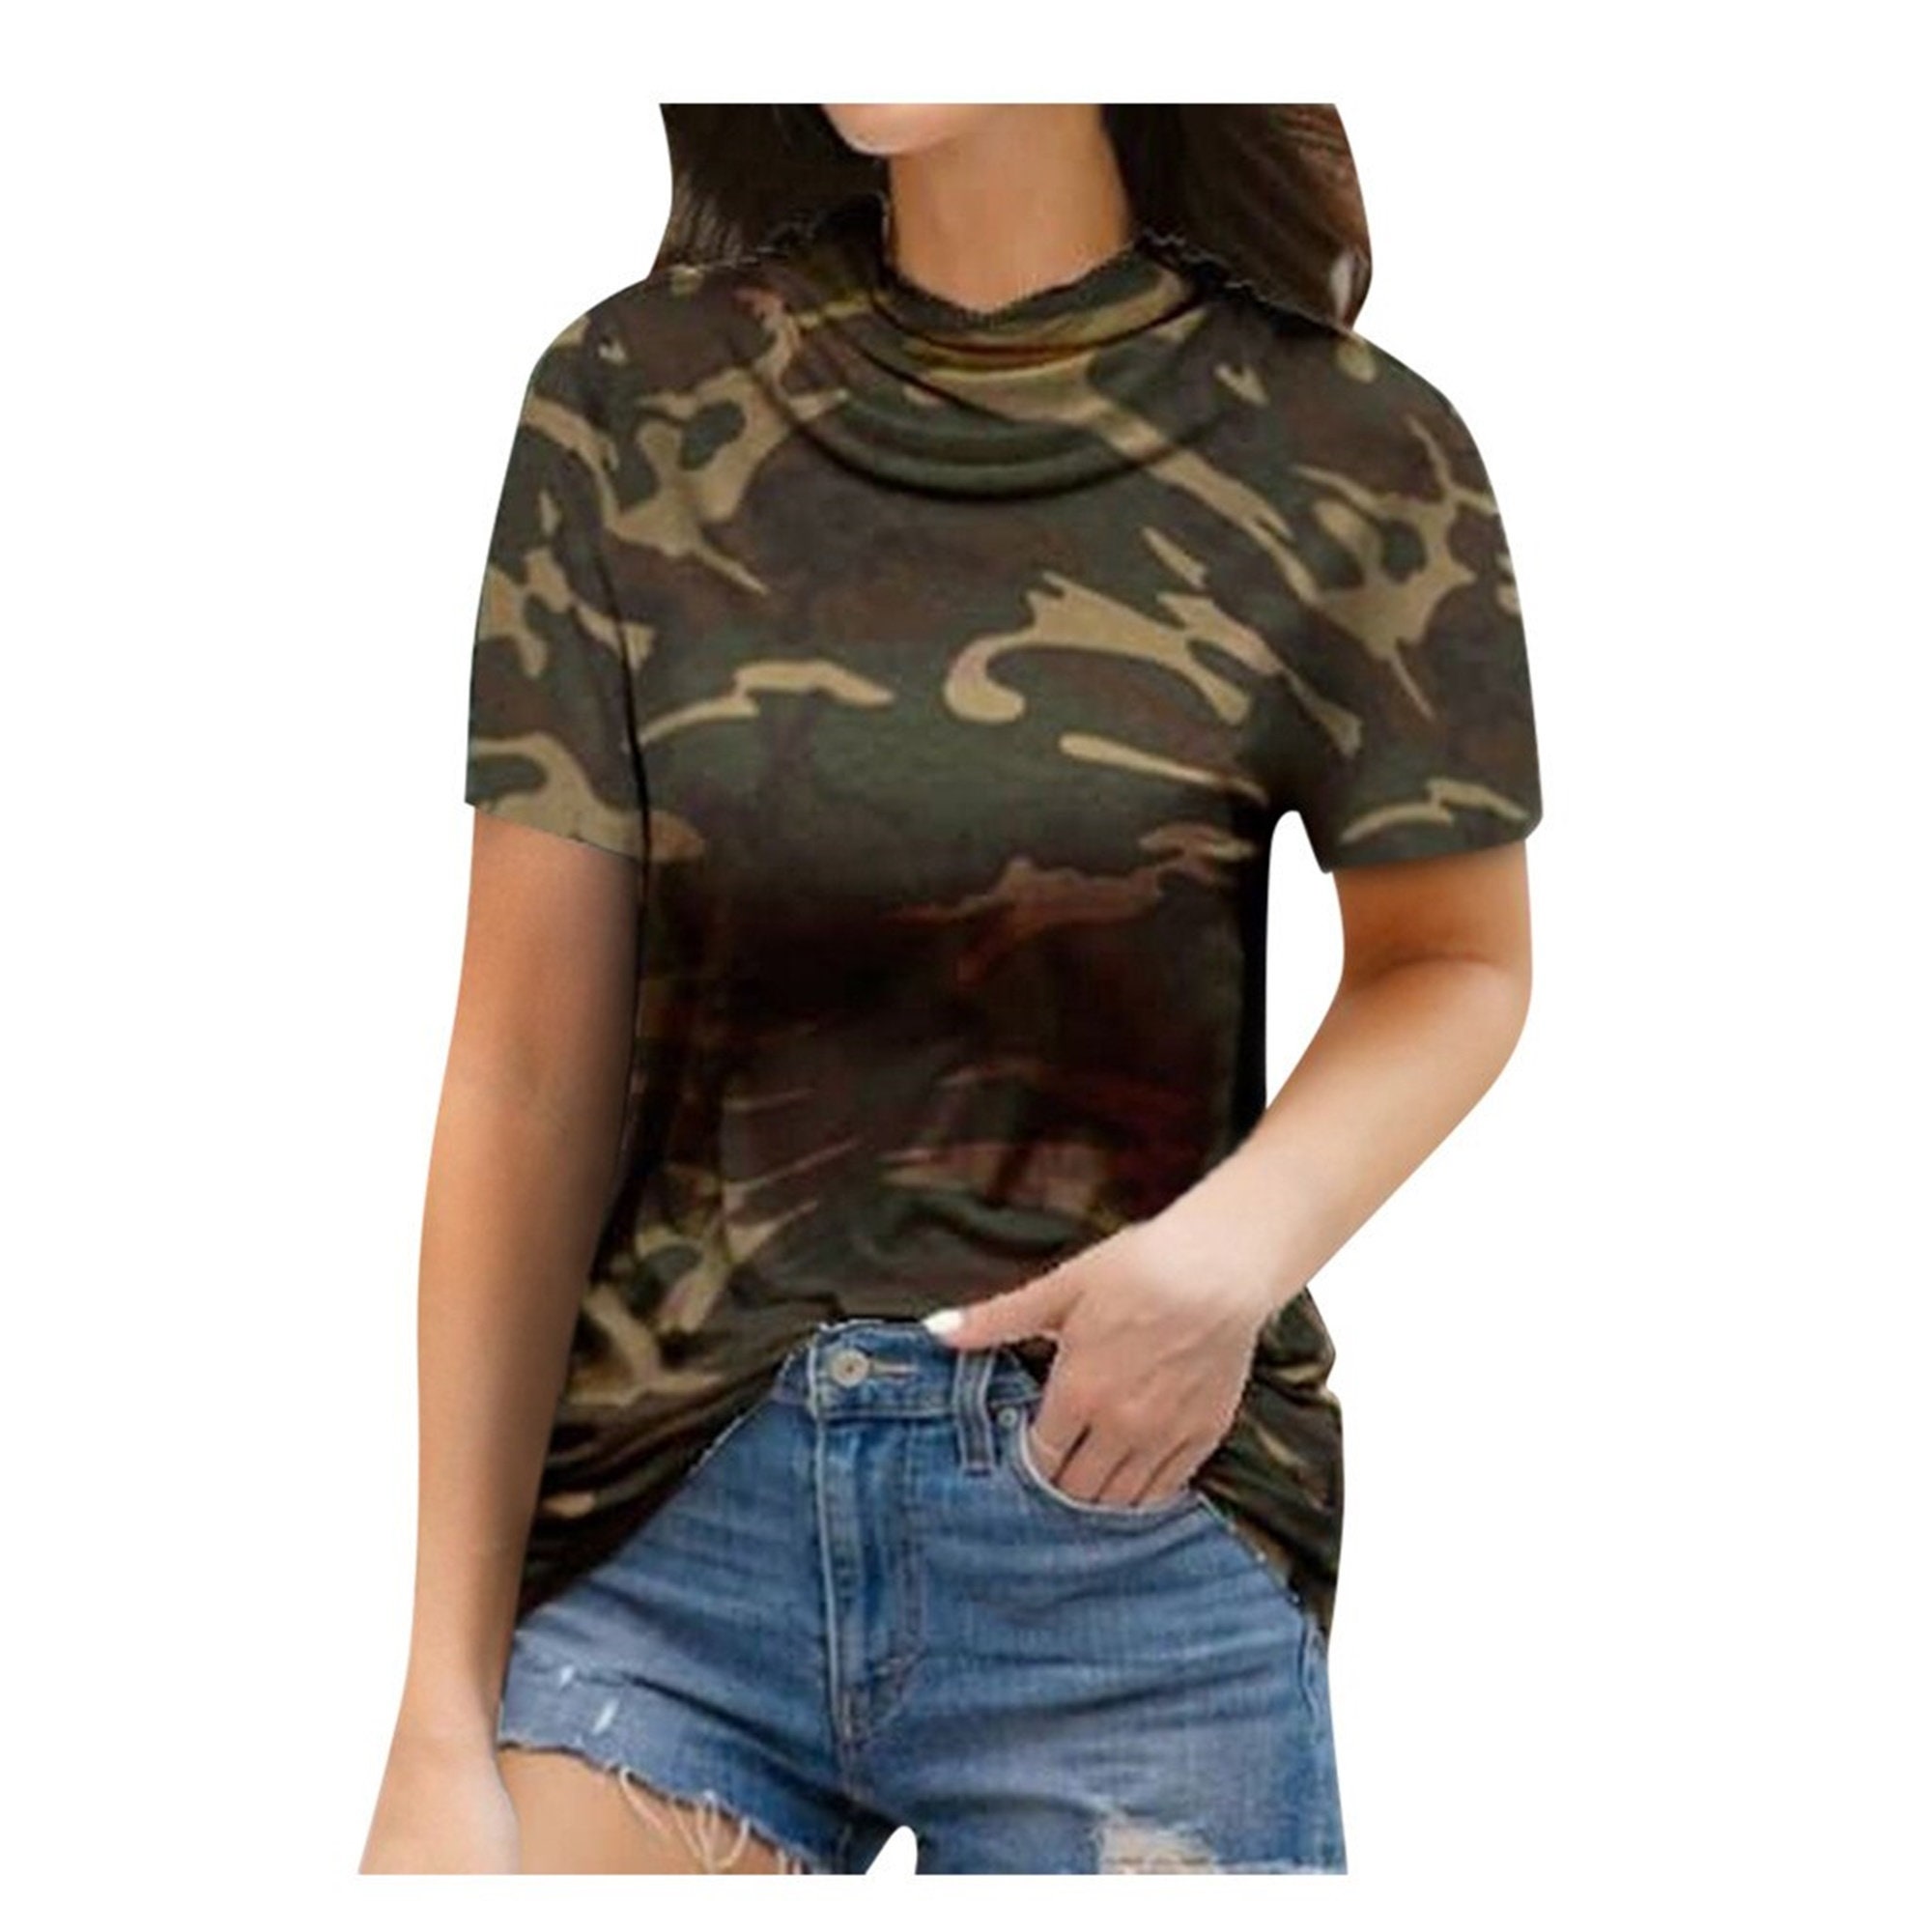 Plus Size Women's Casual T-shirt Camouflage Printed | Etsy